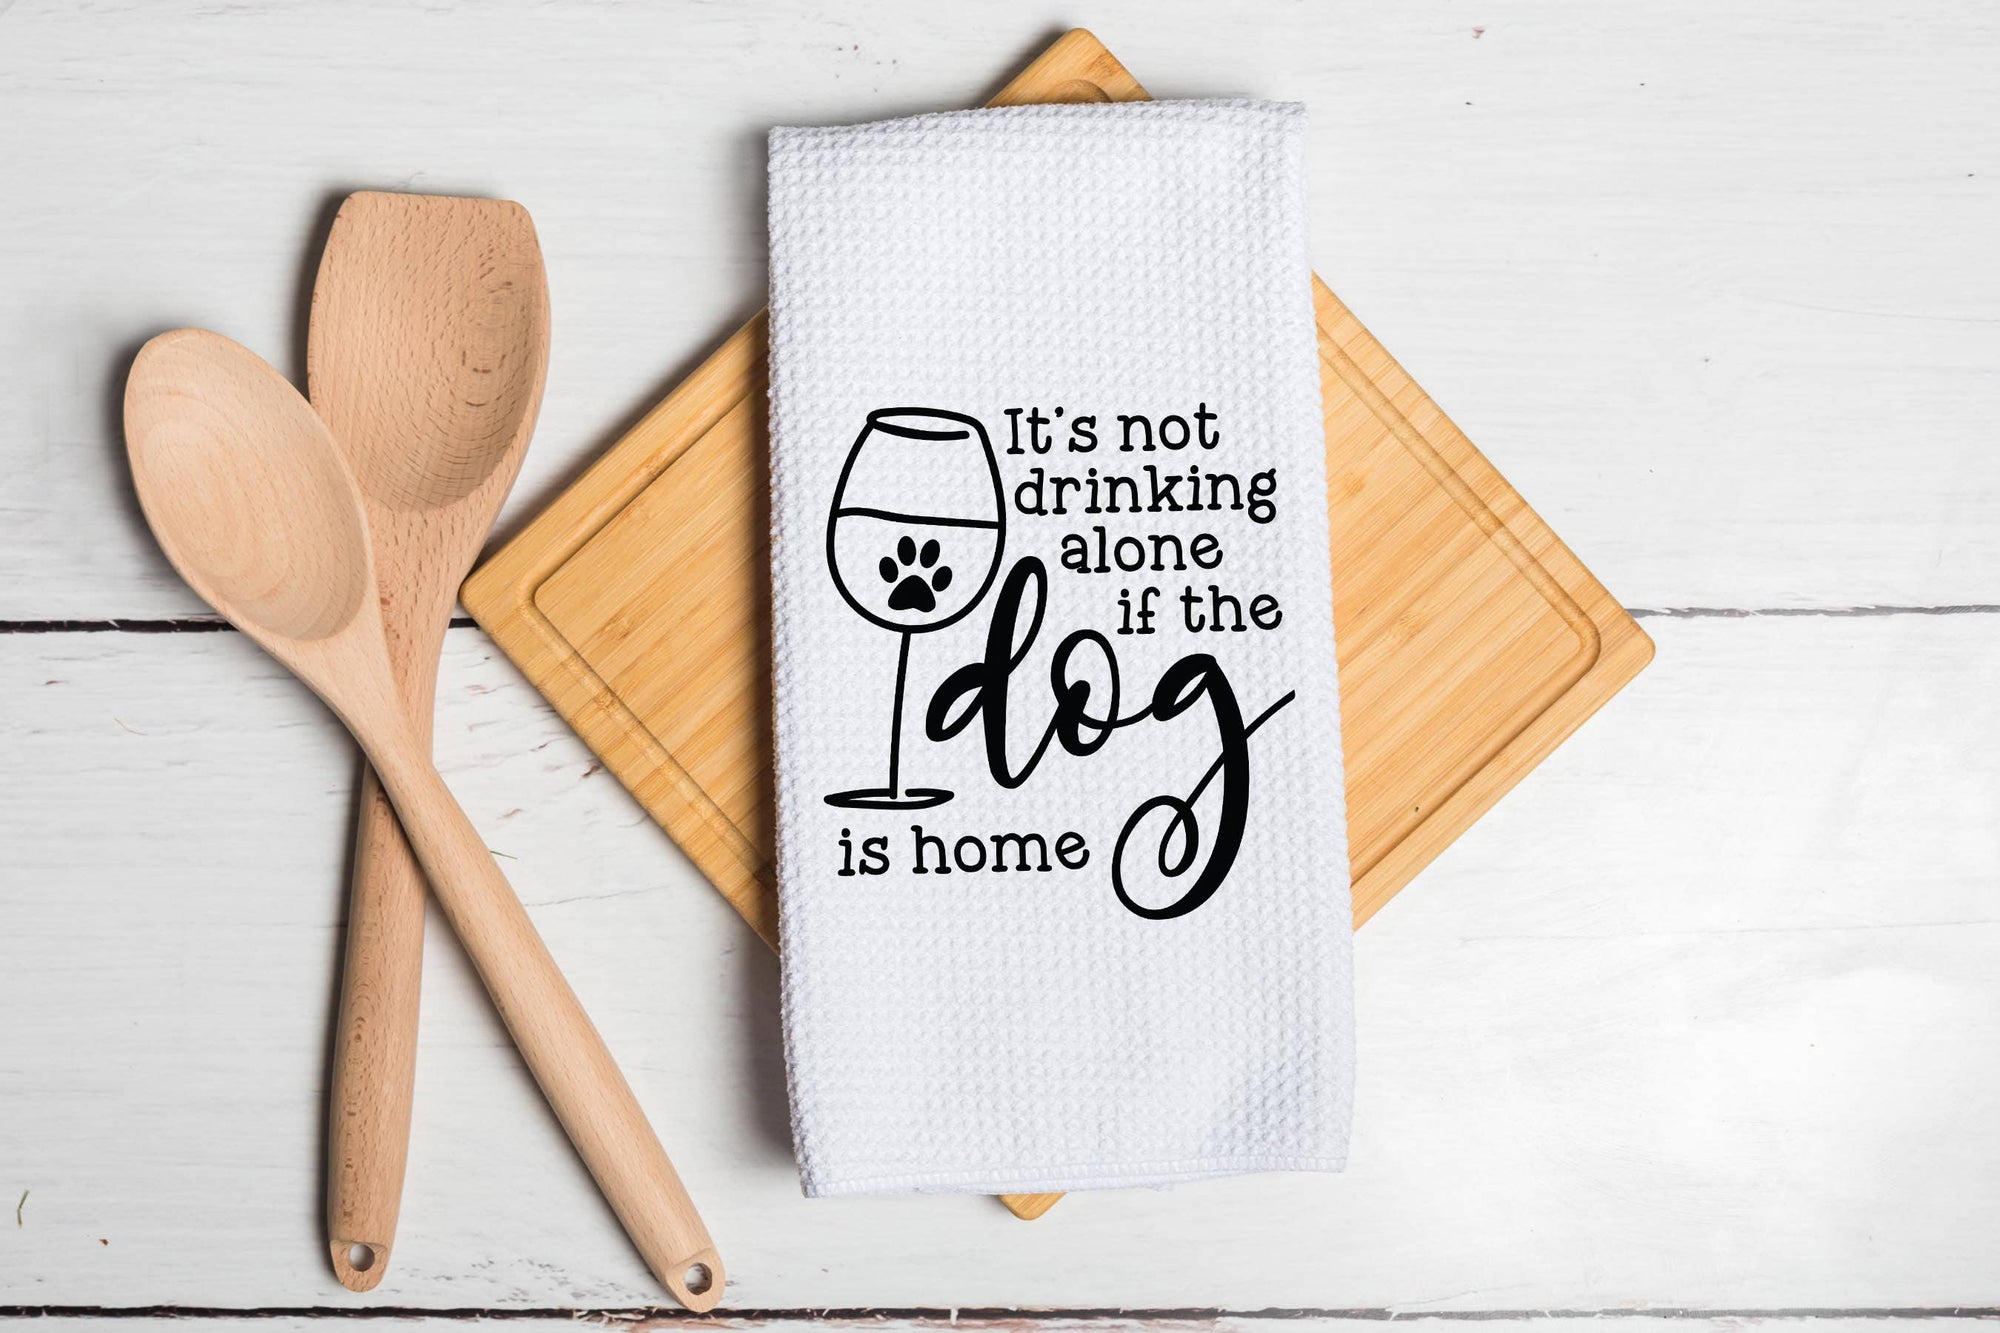 If the Dog is Home Wine Towel